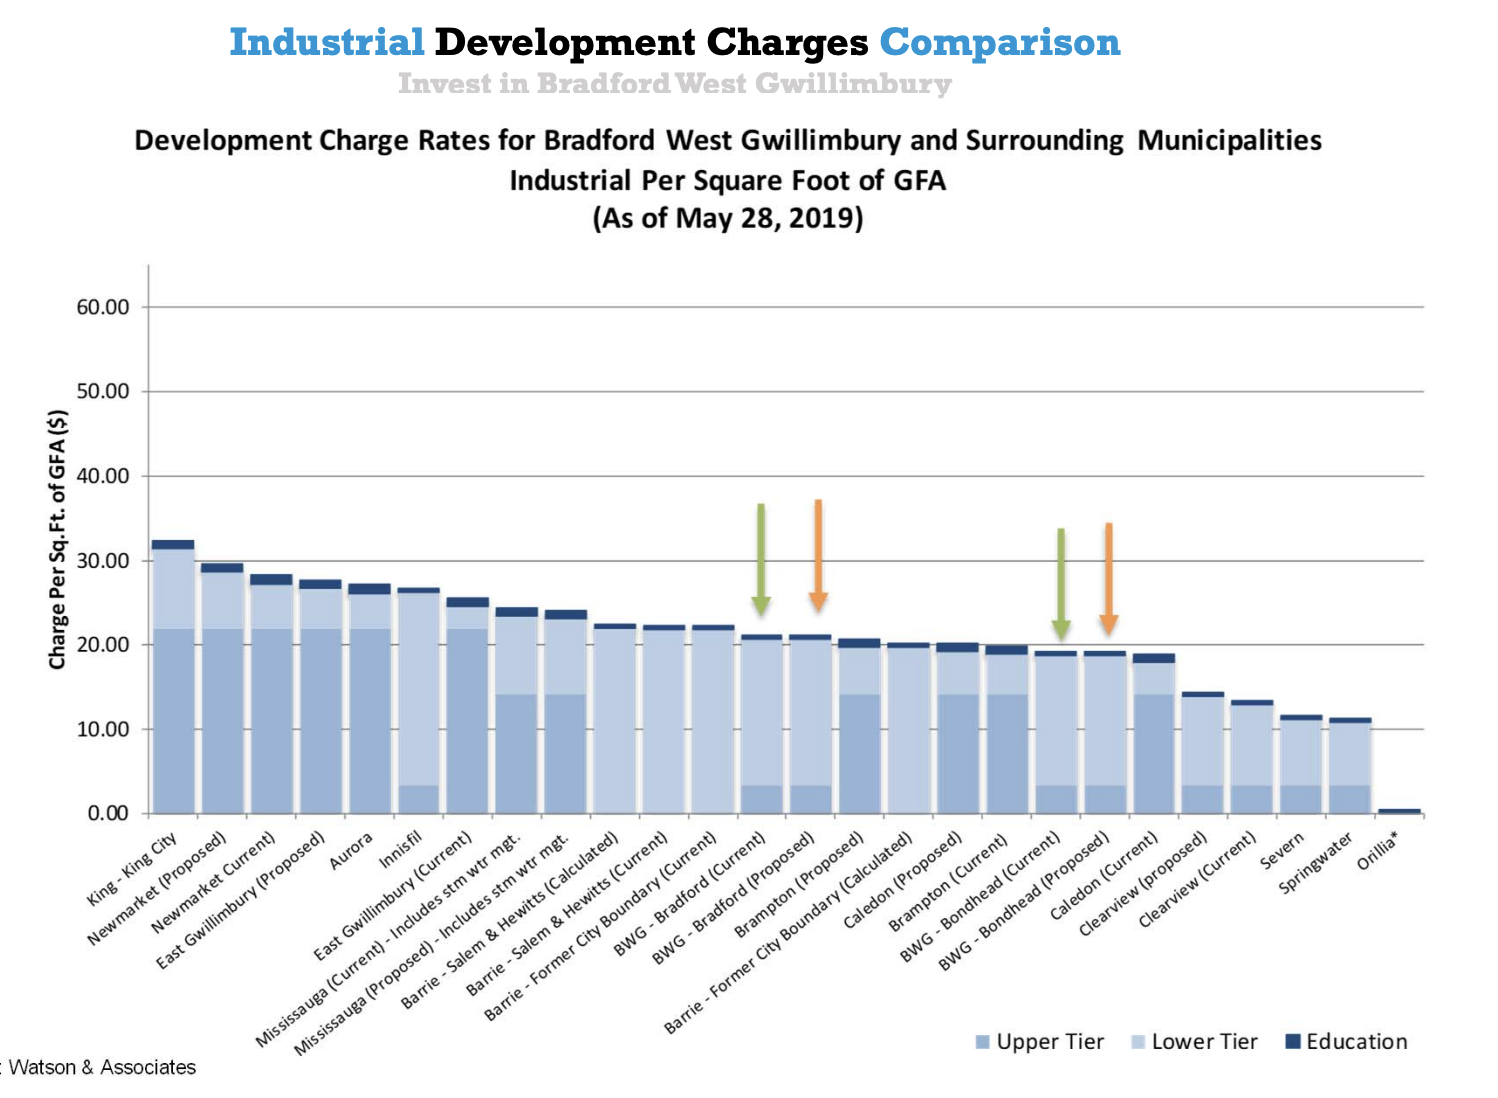 Industrial Development Charges Chart comparing BWG to surrounding municipalities